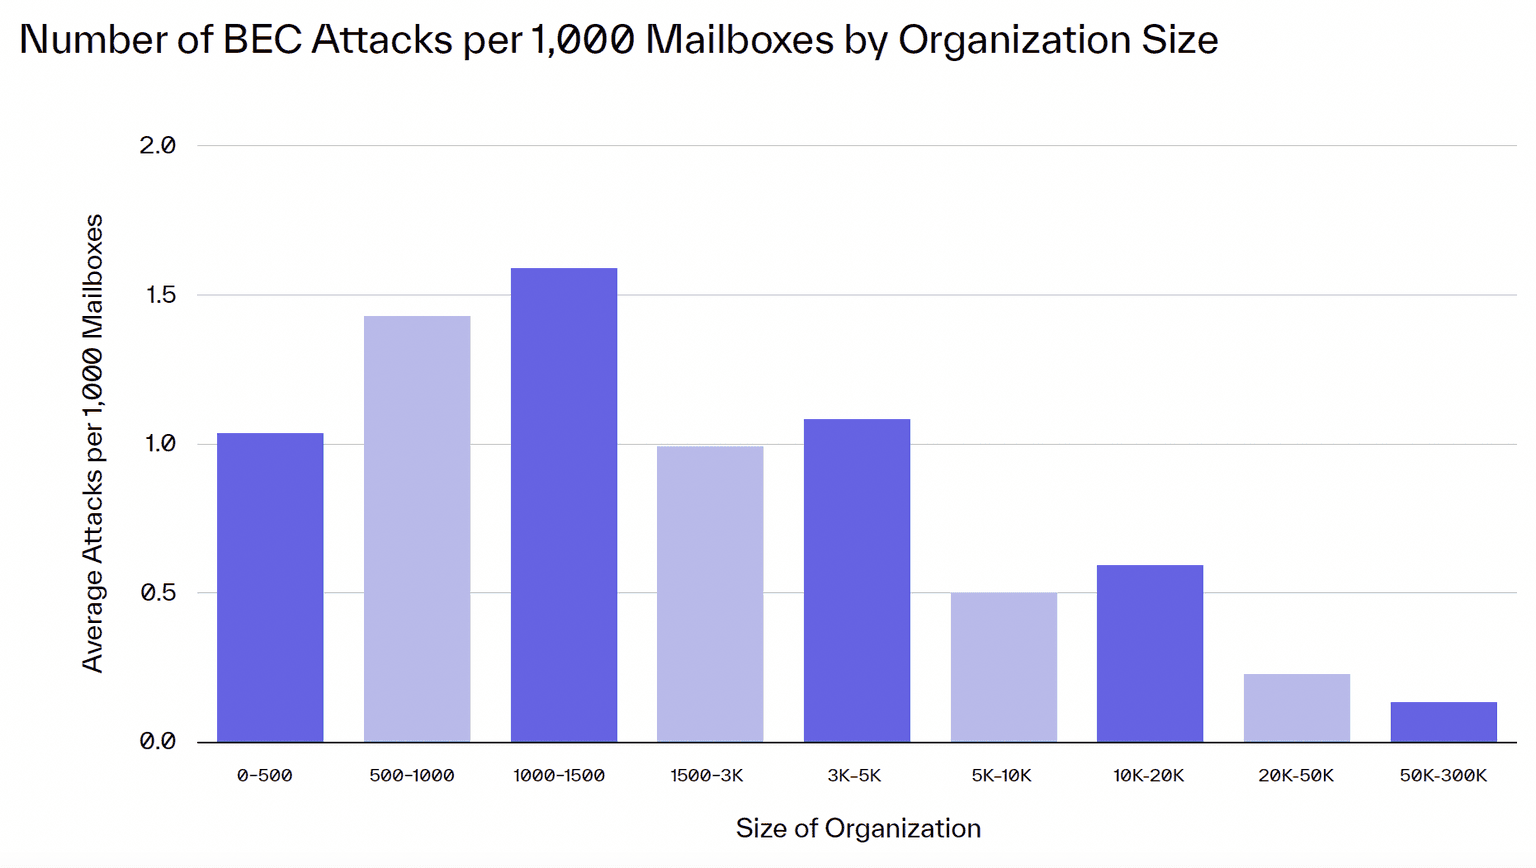 Number of BEC Attacks per 1000 Mailboxes by Org Size